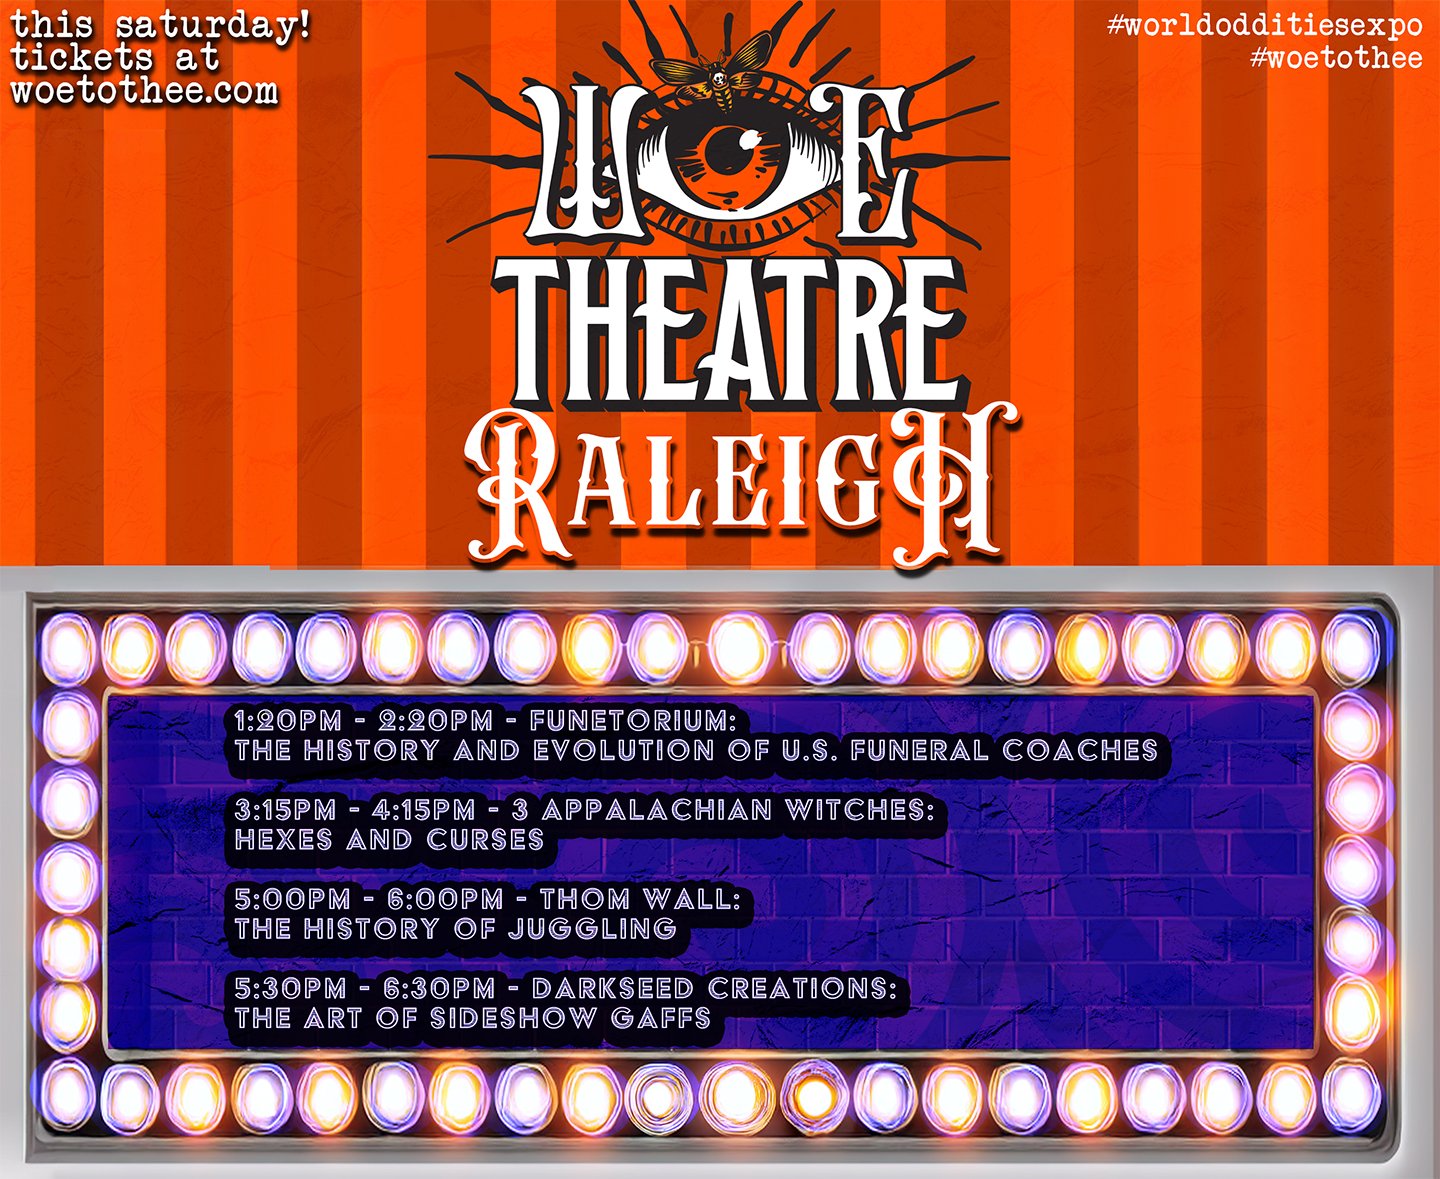 💀 WOE Raleigh Theatre Schedule! Theatre discussions are included with your GA / VIP tickets! 👁

🎃 WOE ARRIVES IN RALEIGH, NC 🎪
❌
🎃 Saturday, May 11th 🎉 12pm - 8pm 
👁️ North Carolina State Fair Exposition Center 
🙀 4285 Trinity Road, Raleigh N